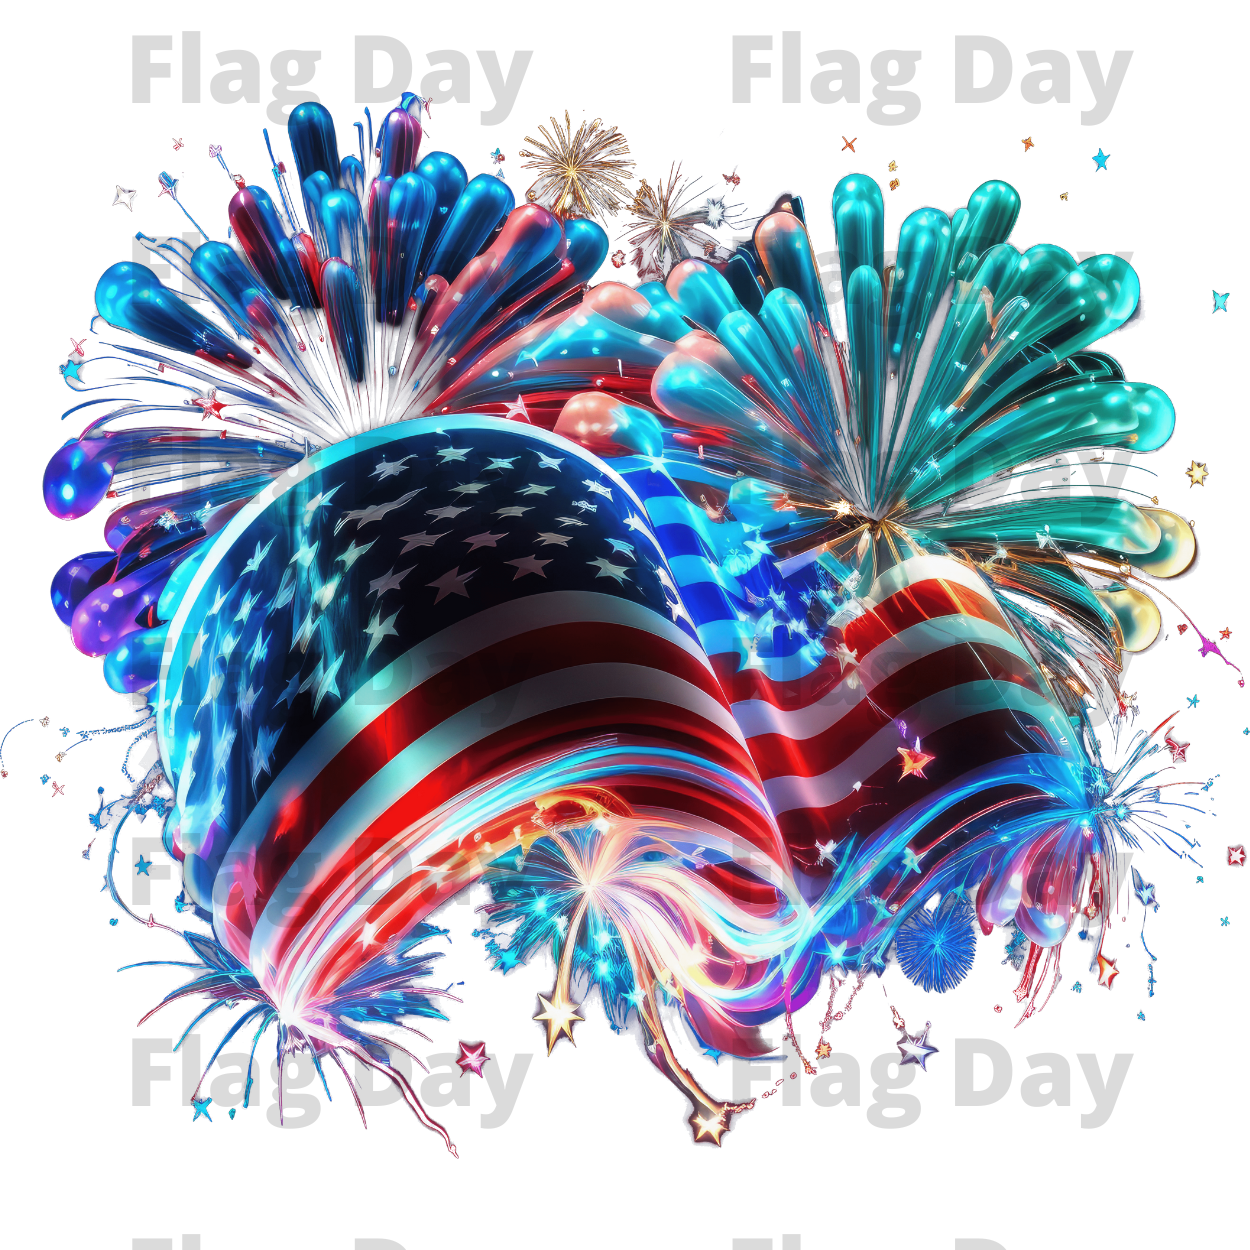 American Flag with Fireworks Cartoon Style